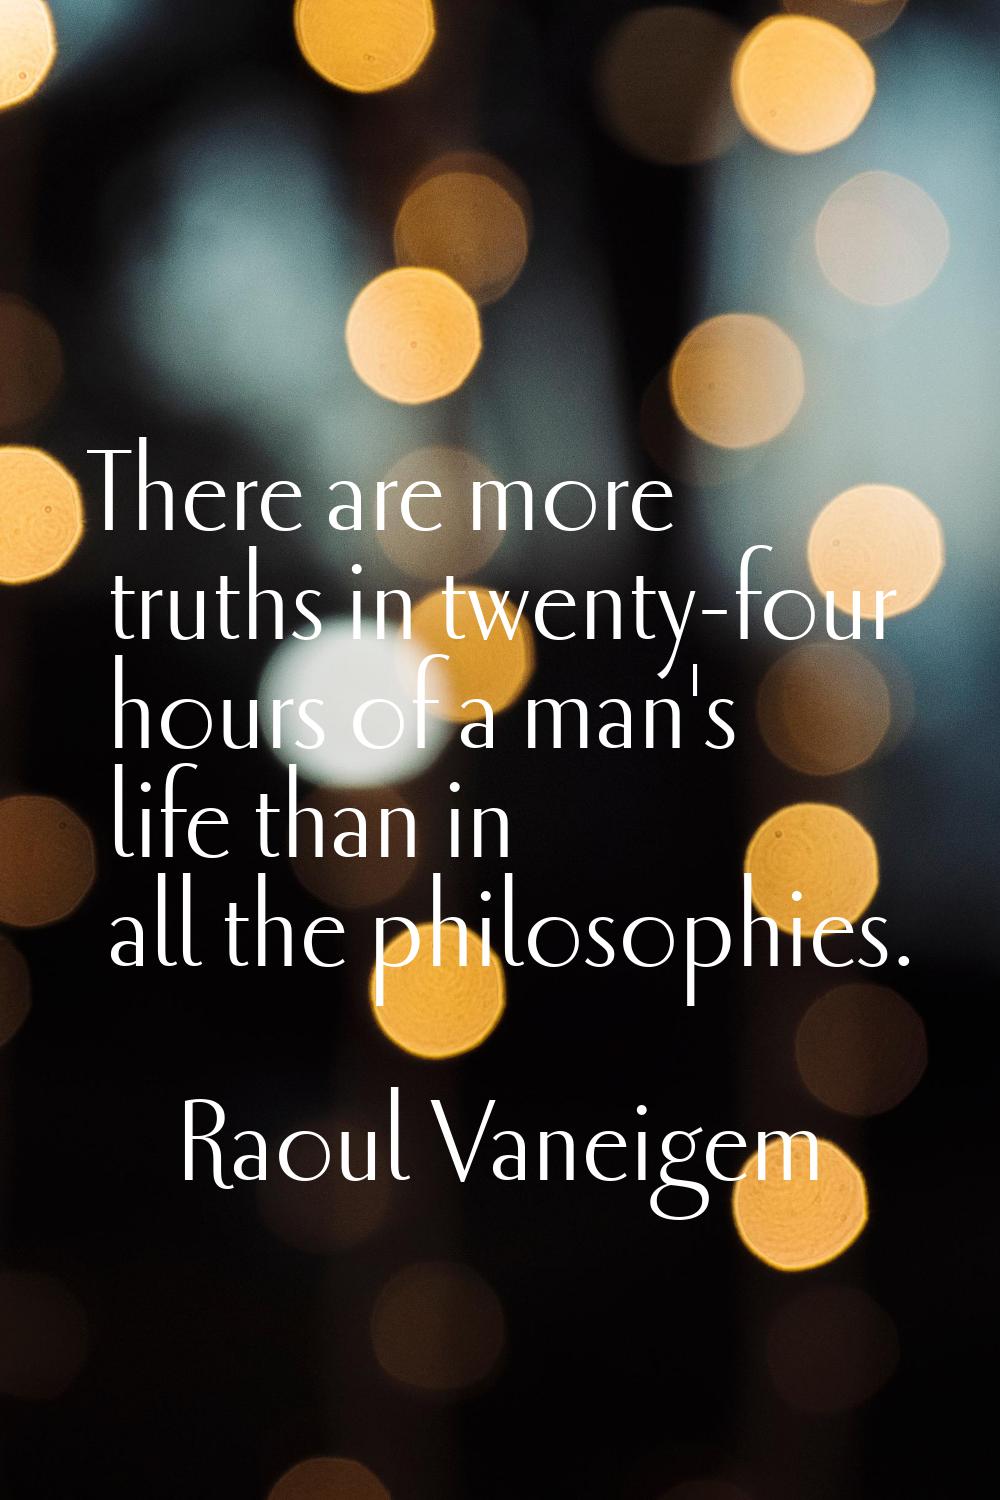 There are more truths in twenty-four hours of a man's life than in all the philosophies.